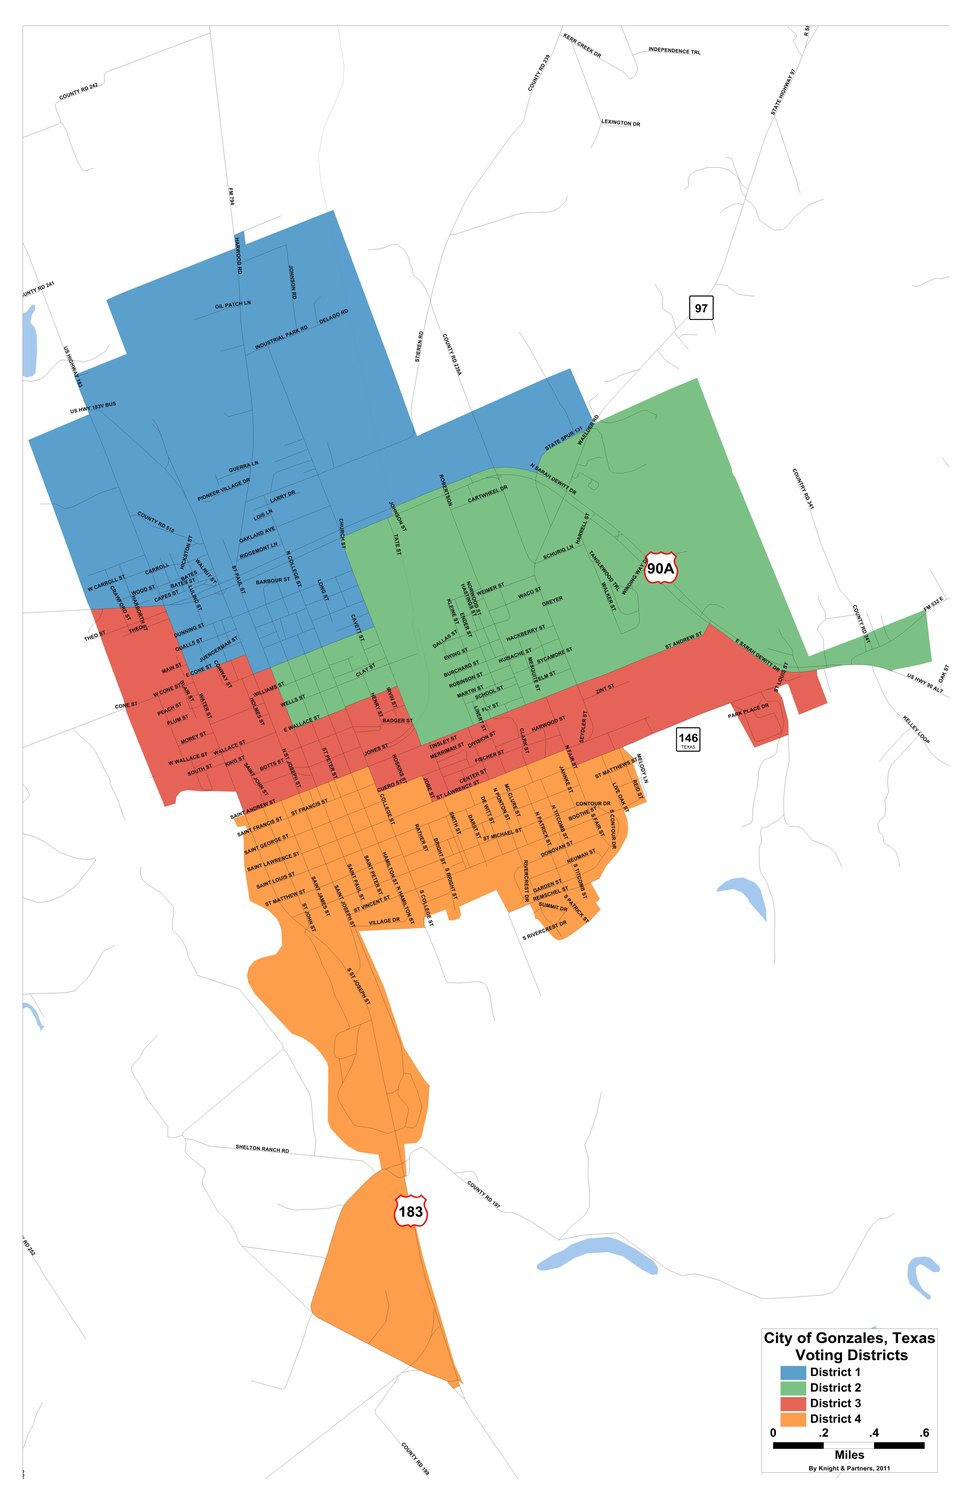 Gonzales Voting Districts including District 4